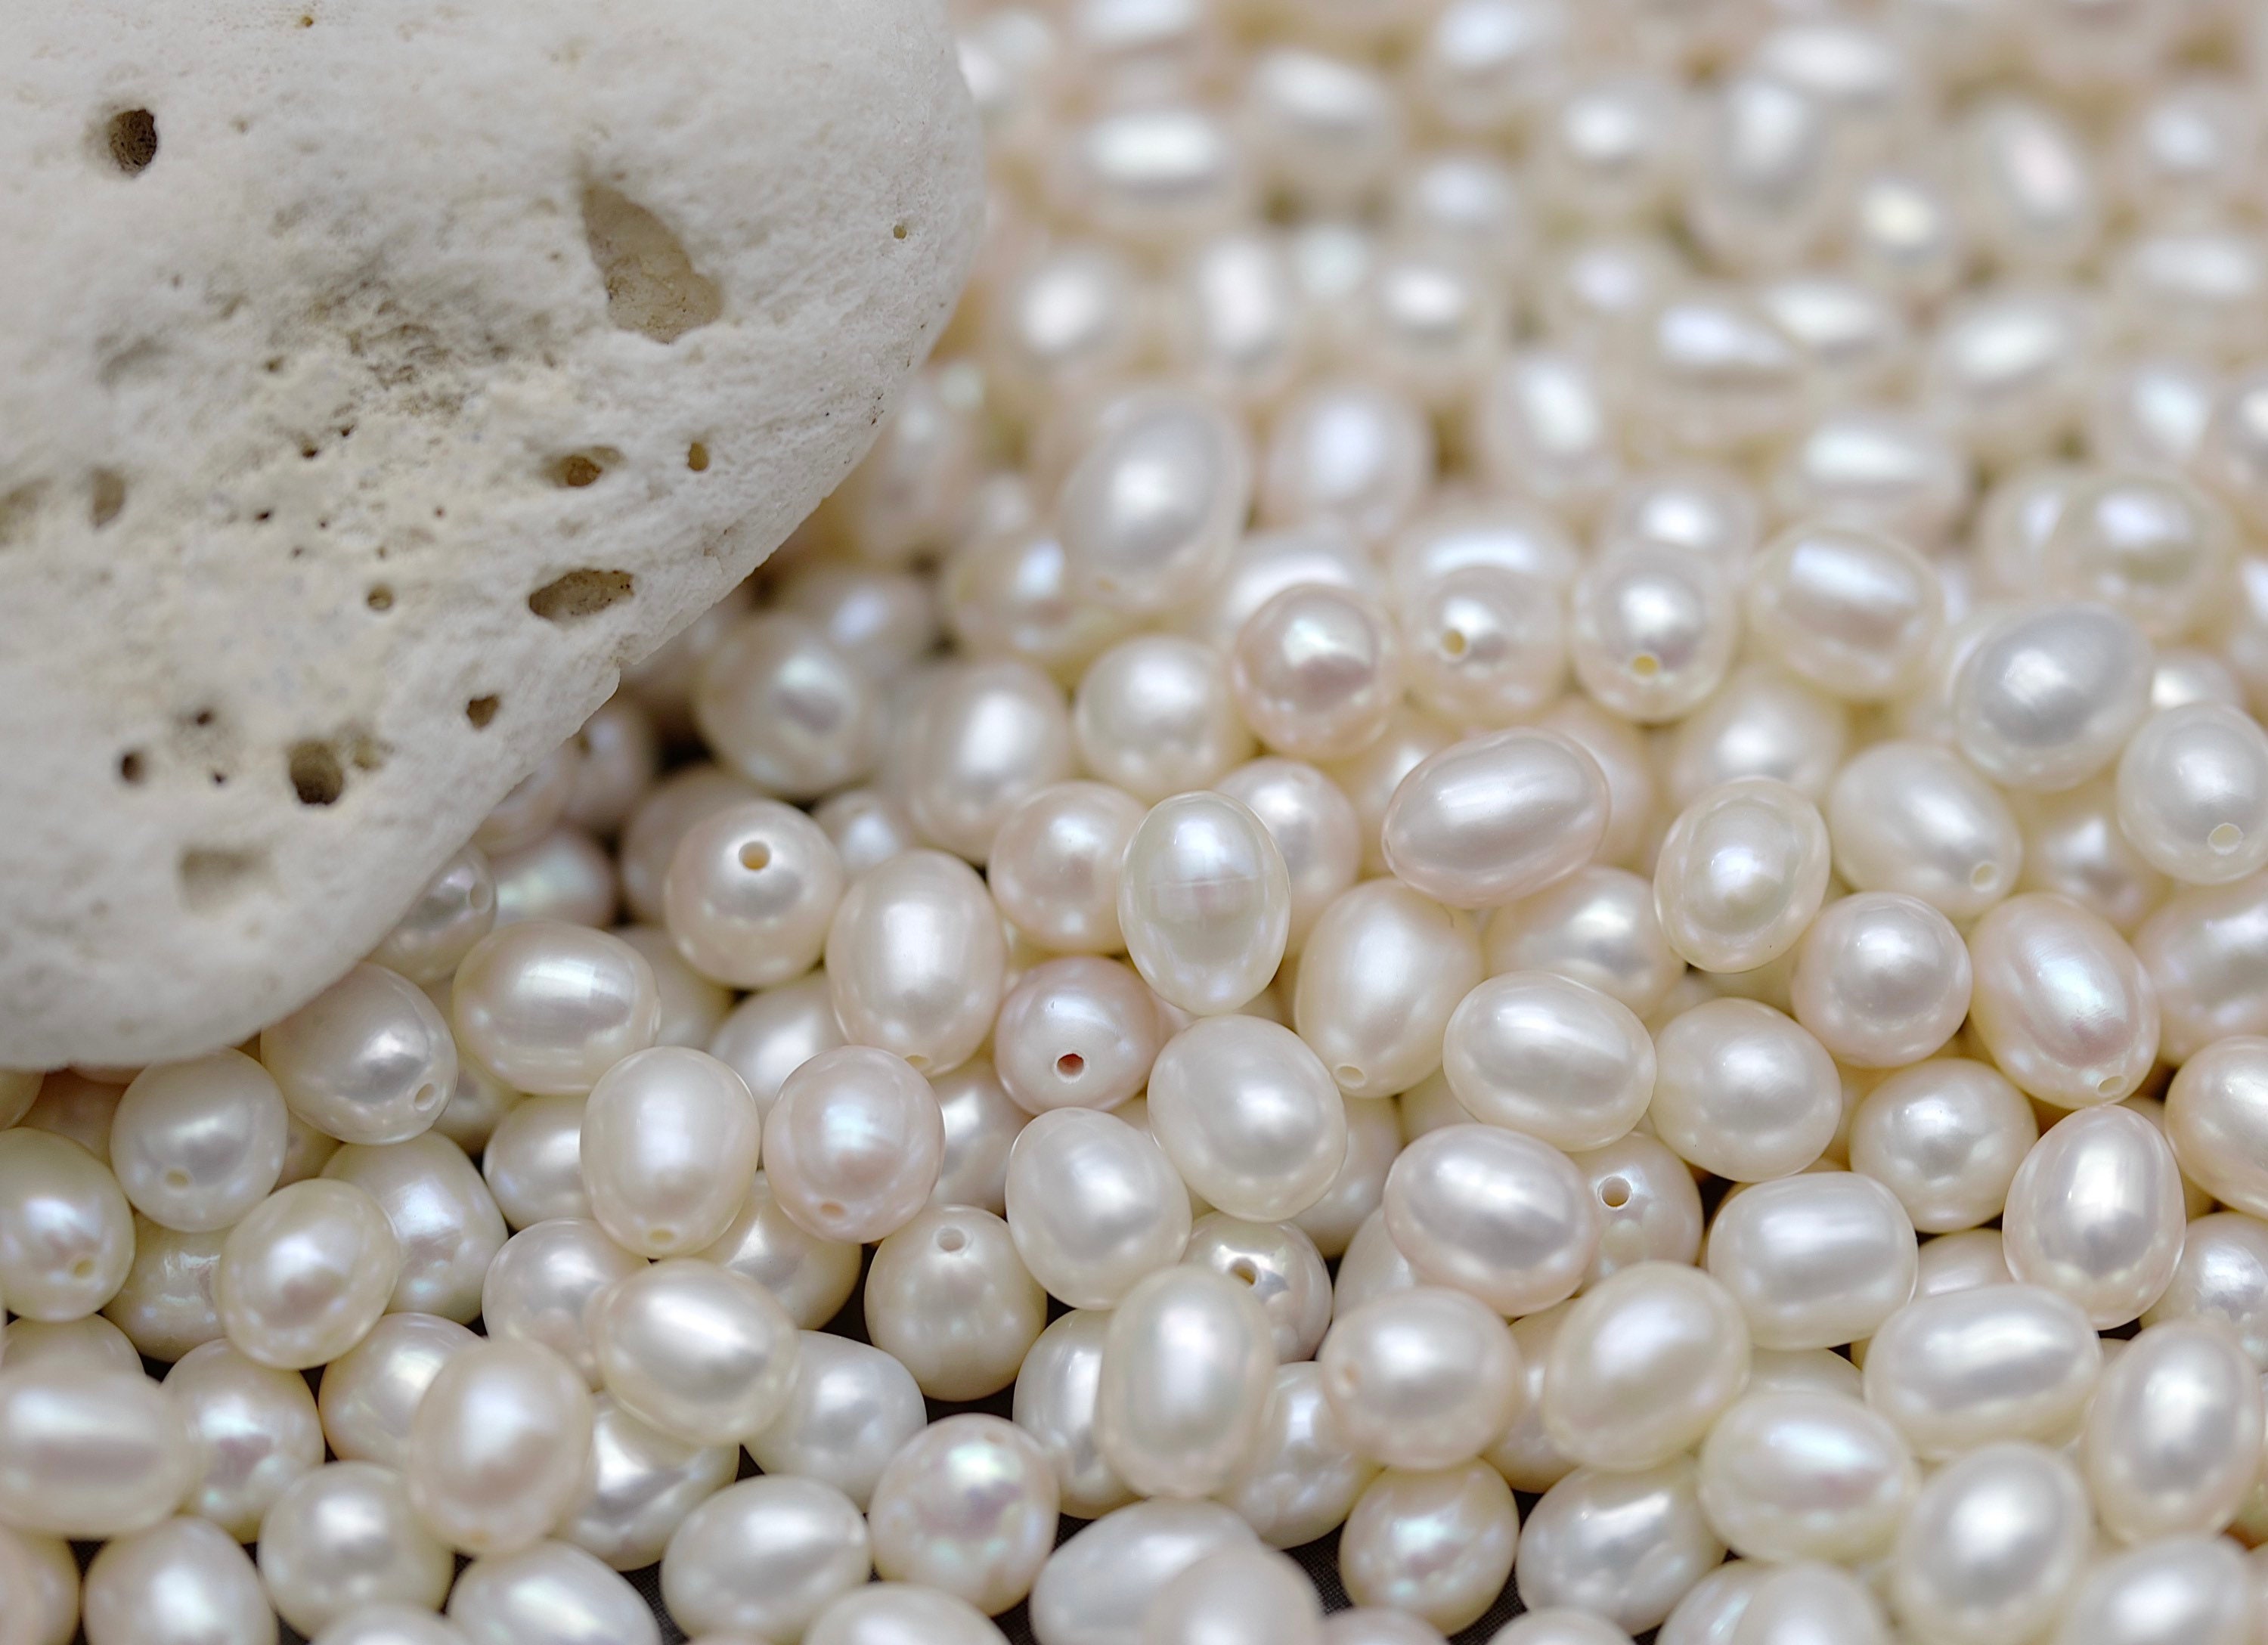 White Freshwater Pearl Rice Oval Beads 7-7.5mm #66178